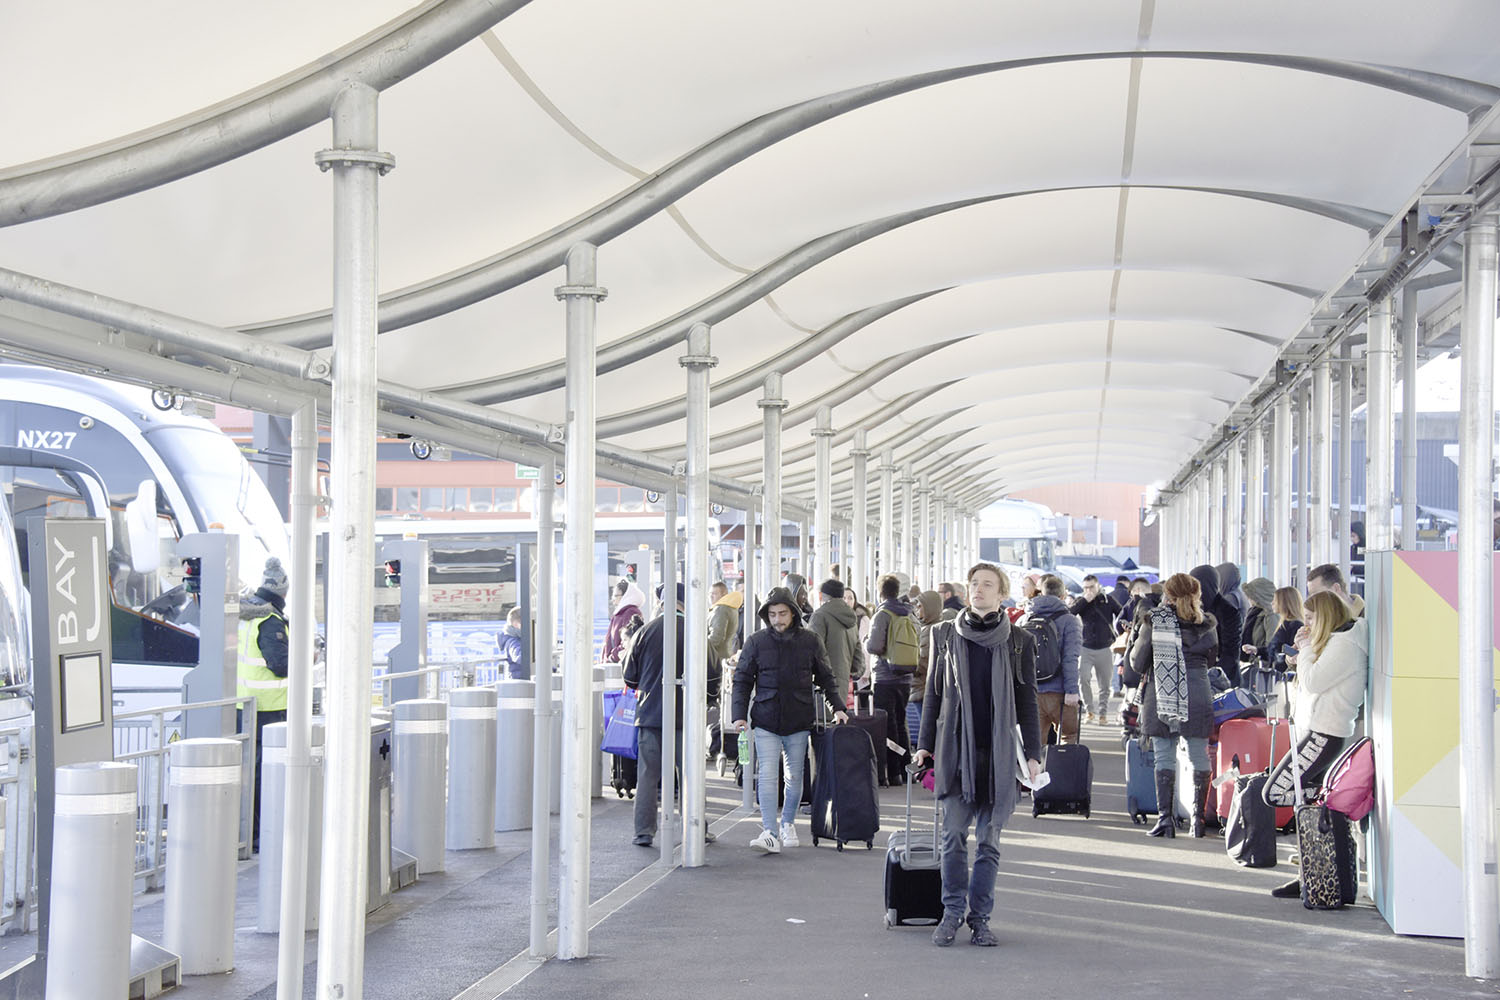 London Luton Airport entrance canopies